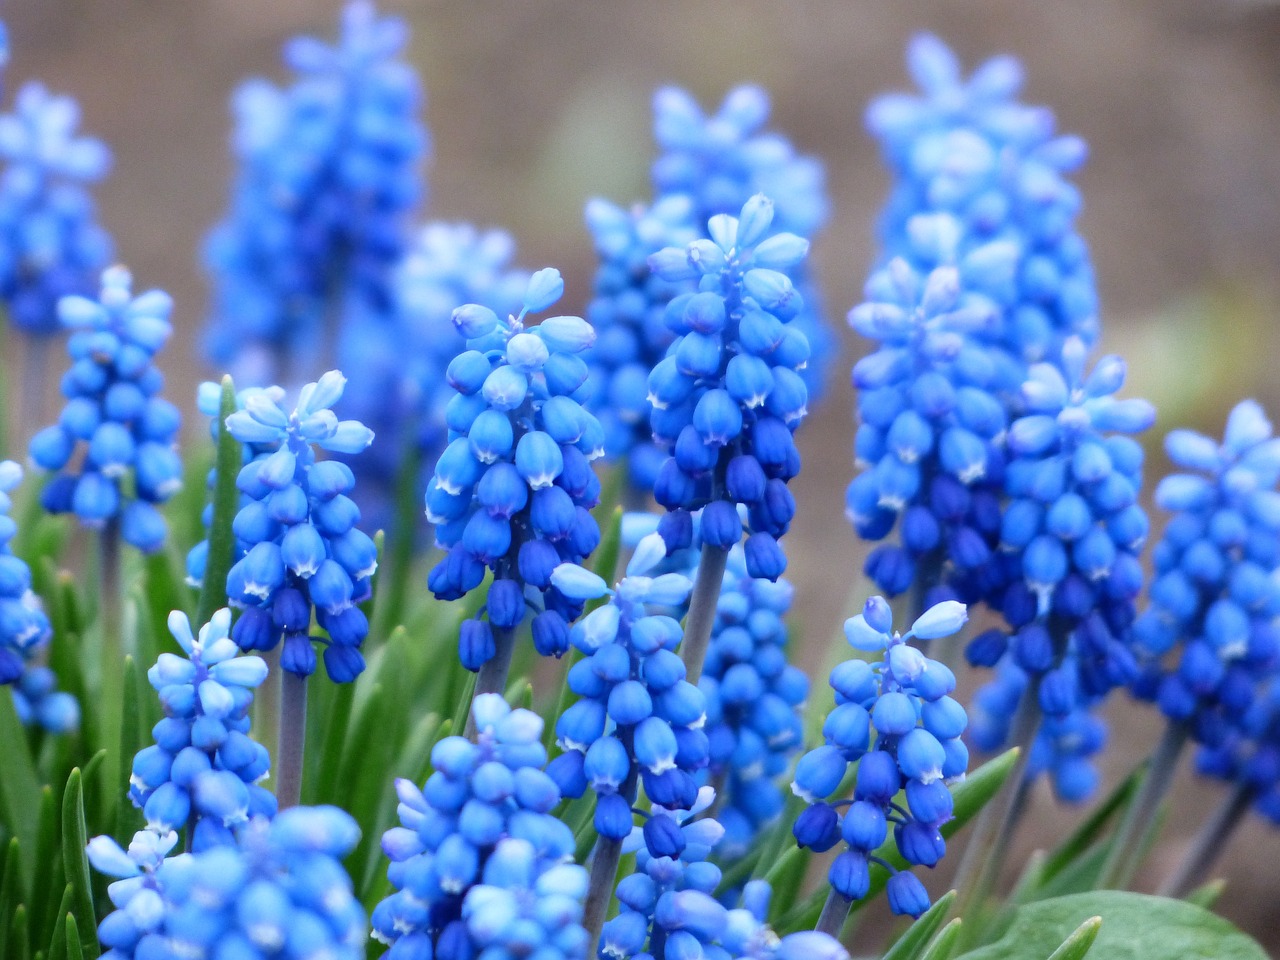 a close up of a bunch of blue flowers, by George Barret, Jr., shutterstock, renaissance, grape hyacinth, full hd, 1 6 x 1 6, 4k post